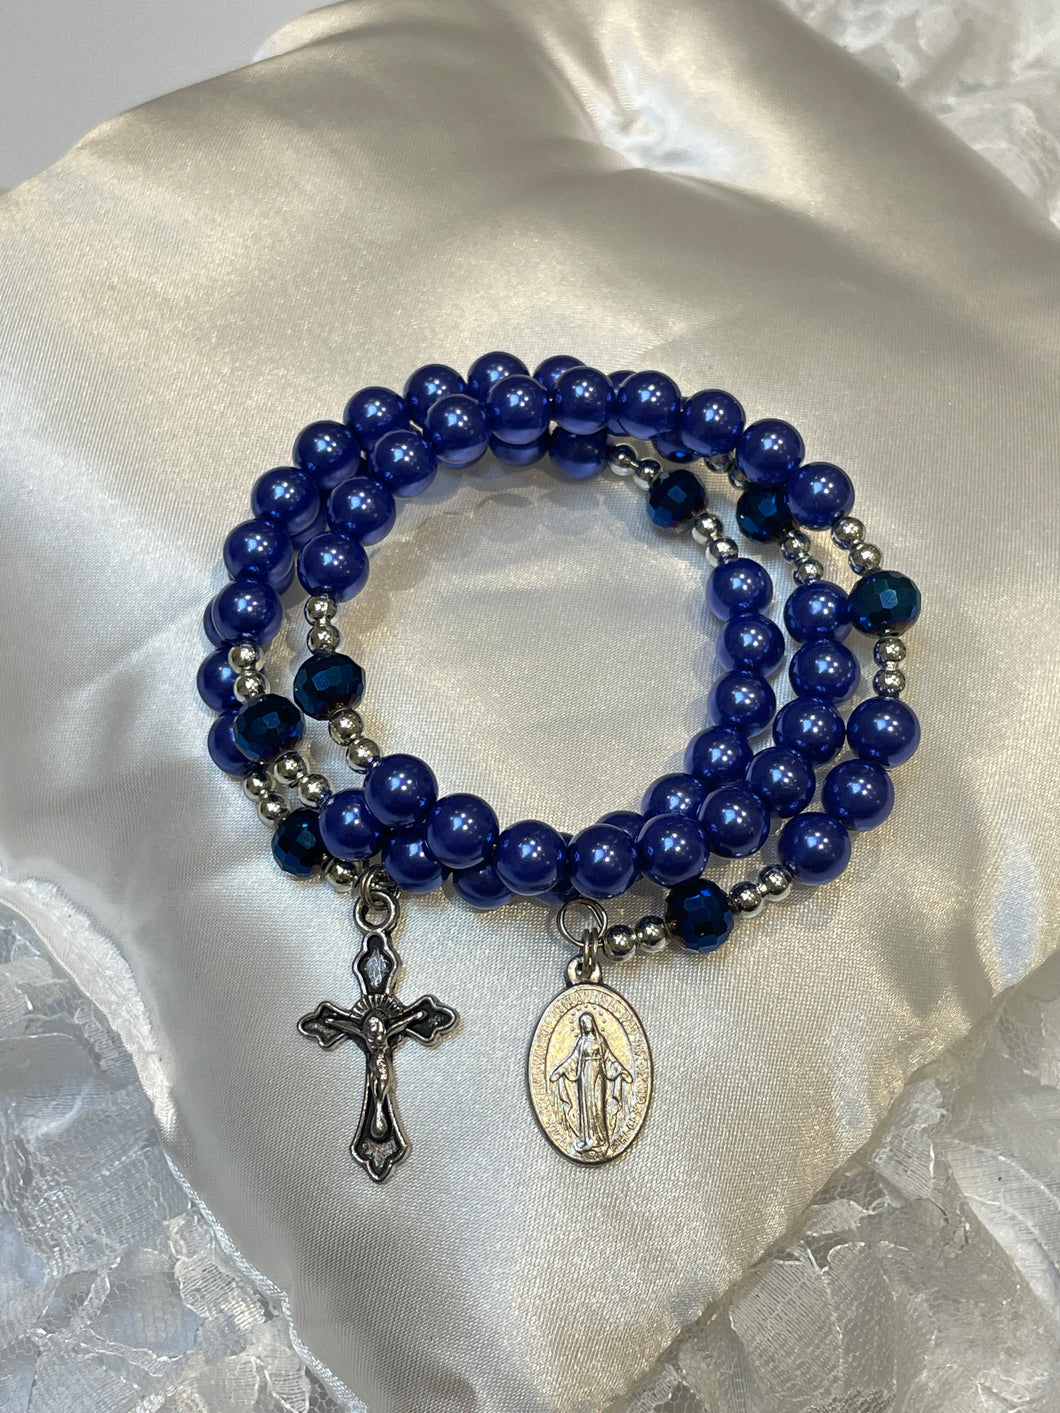 Blue Peal Rosary Bracelet with Miraculous Medal and Crucifix Charms